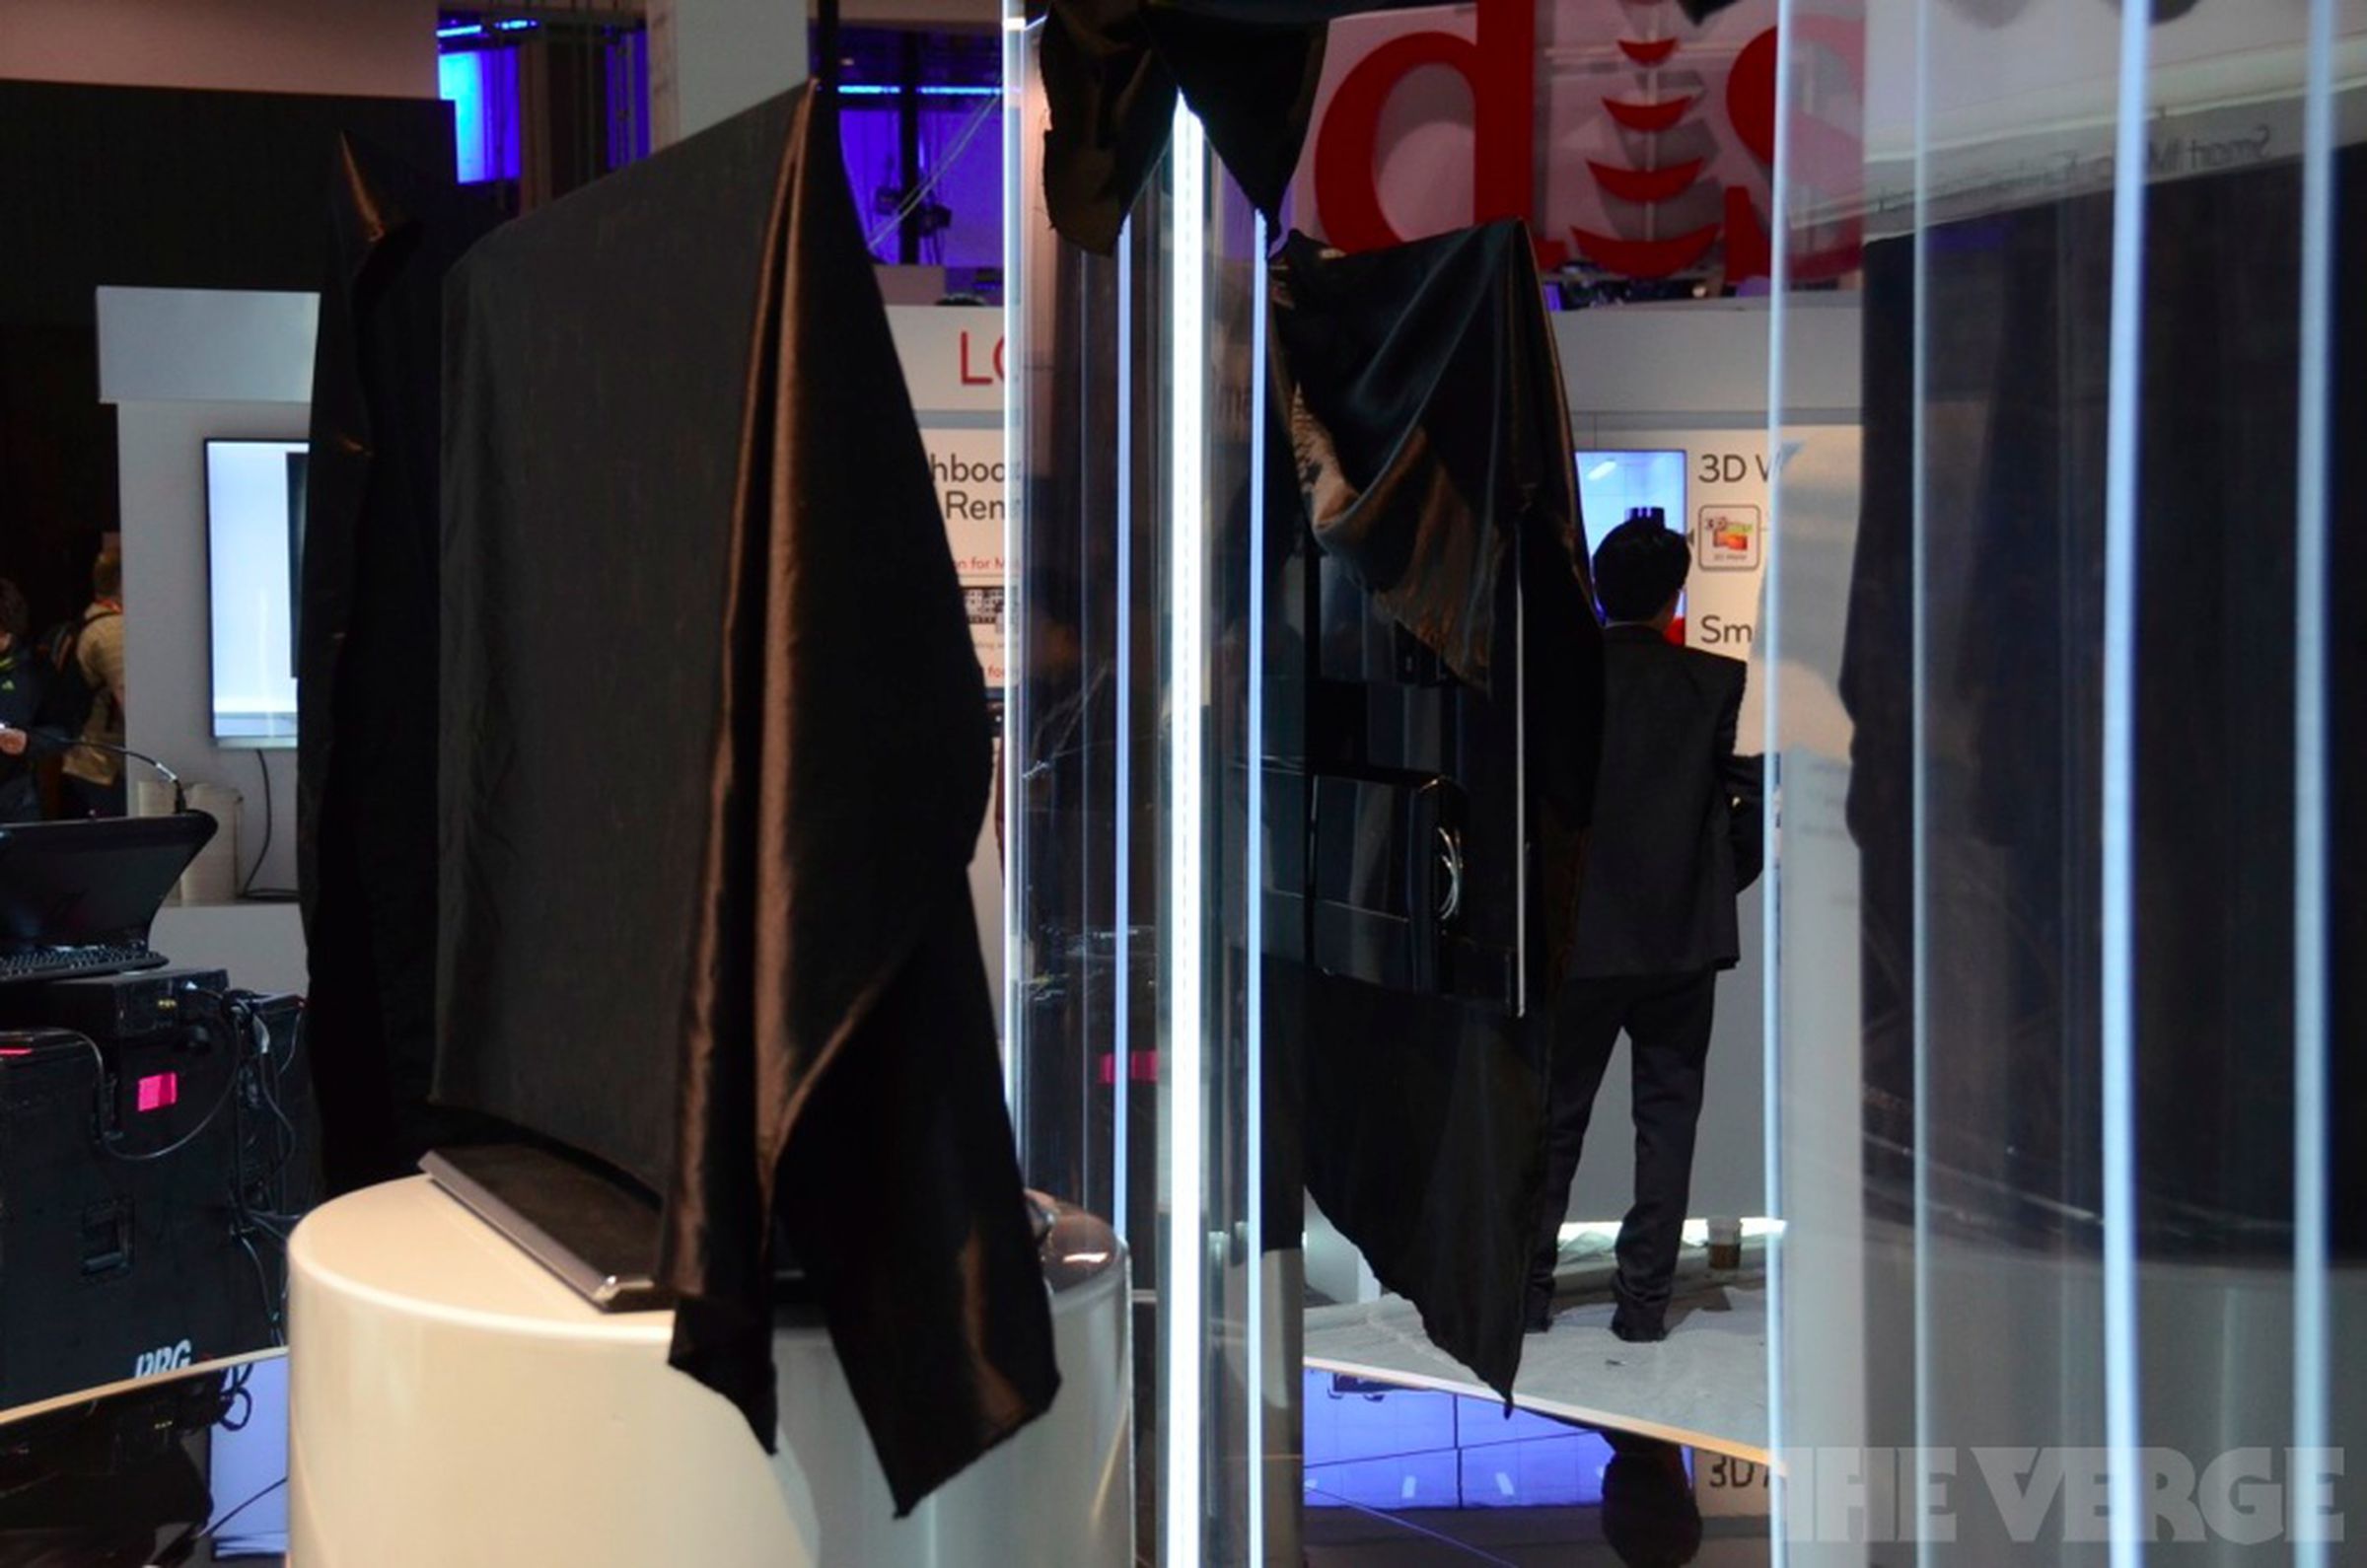 LG's 55-inch OLED TVs under wraps at CES 2012